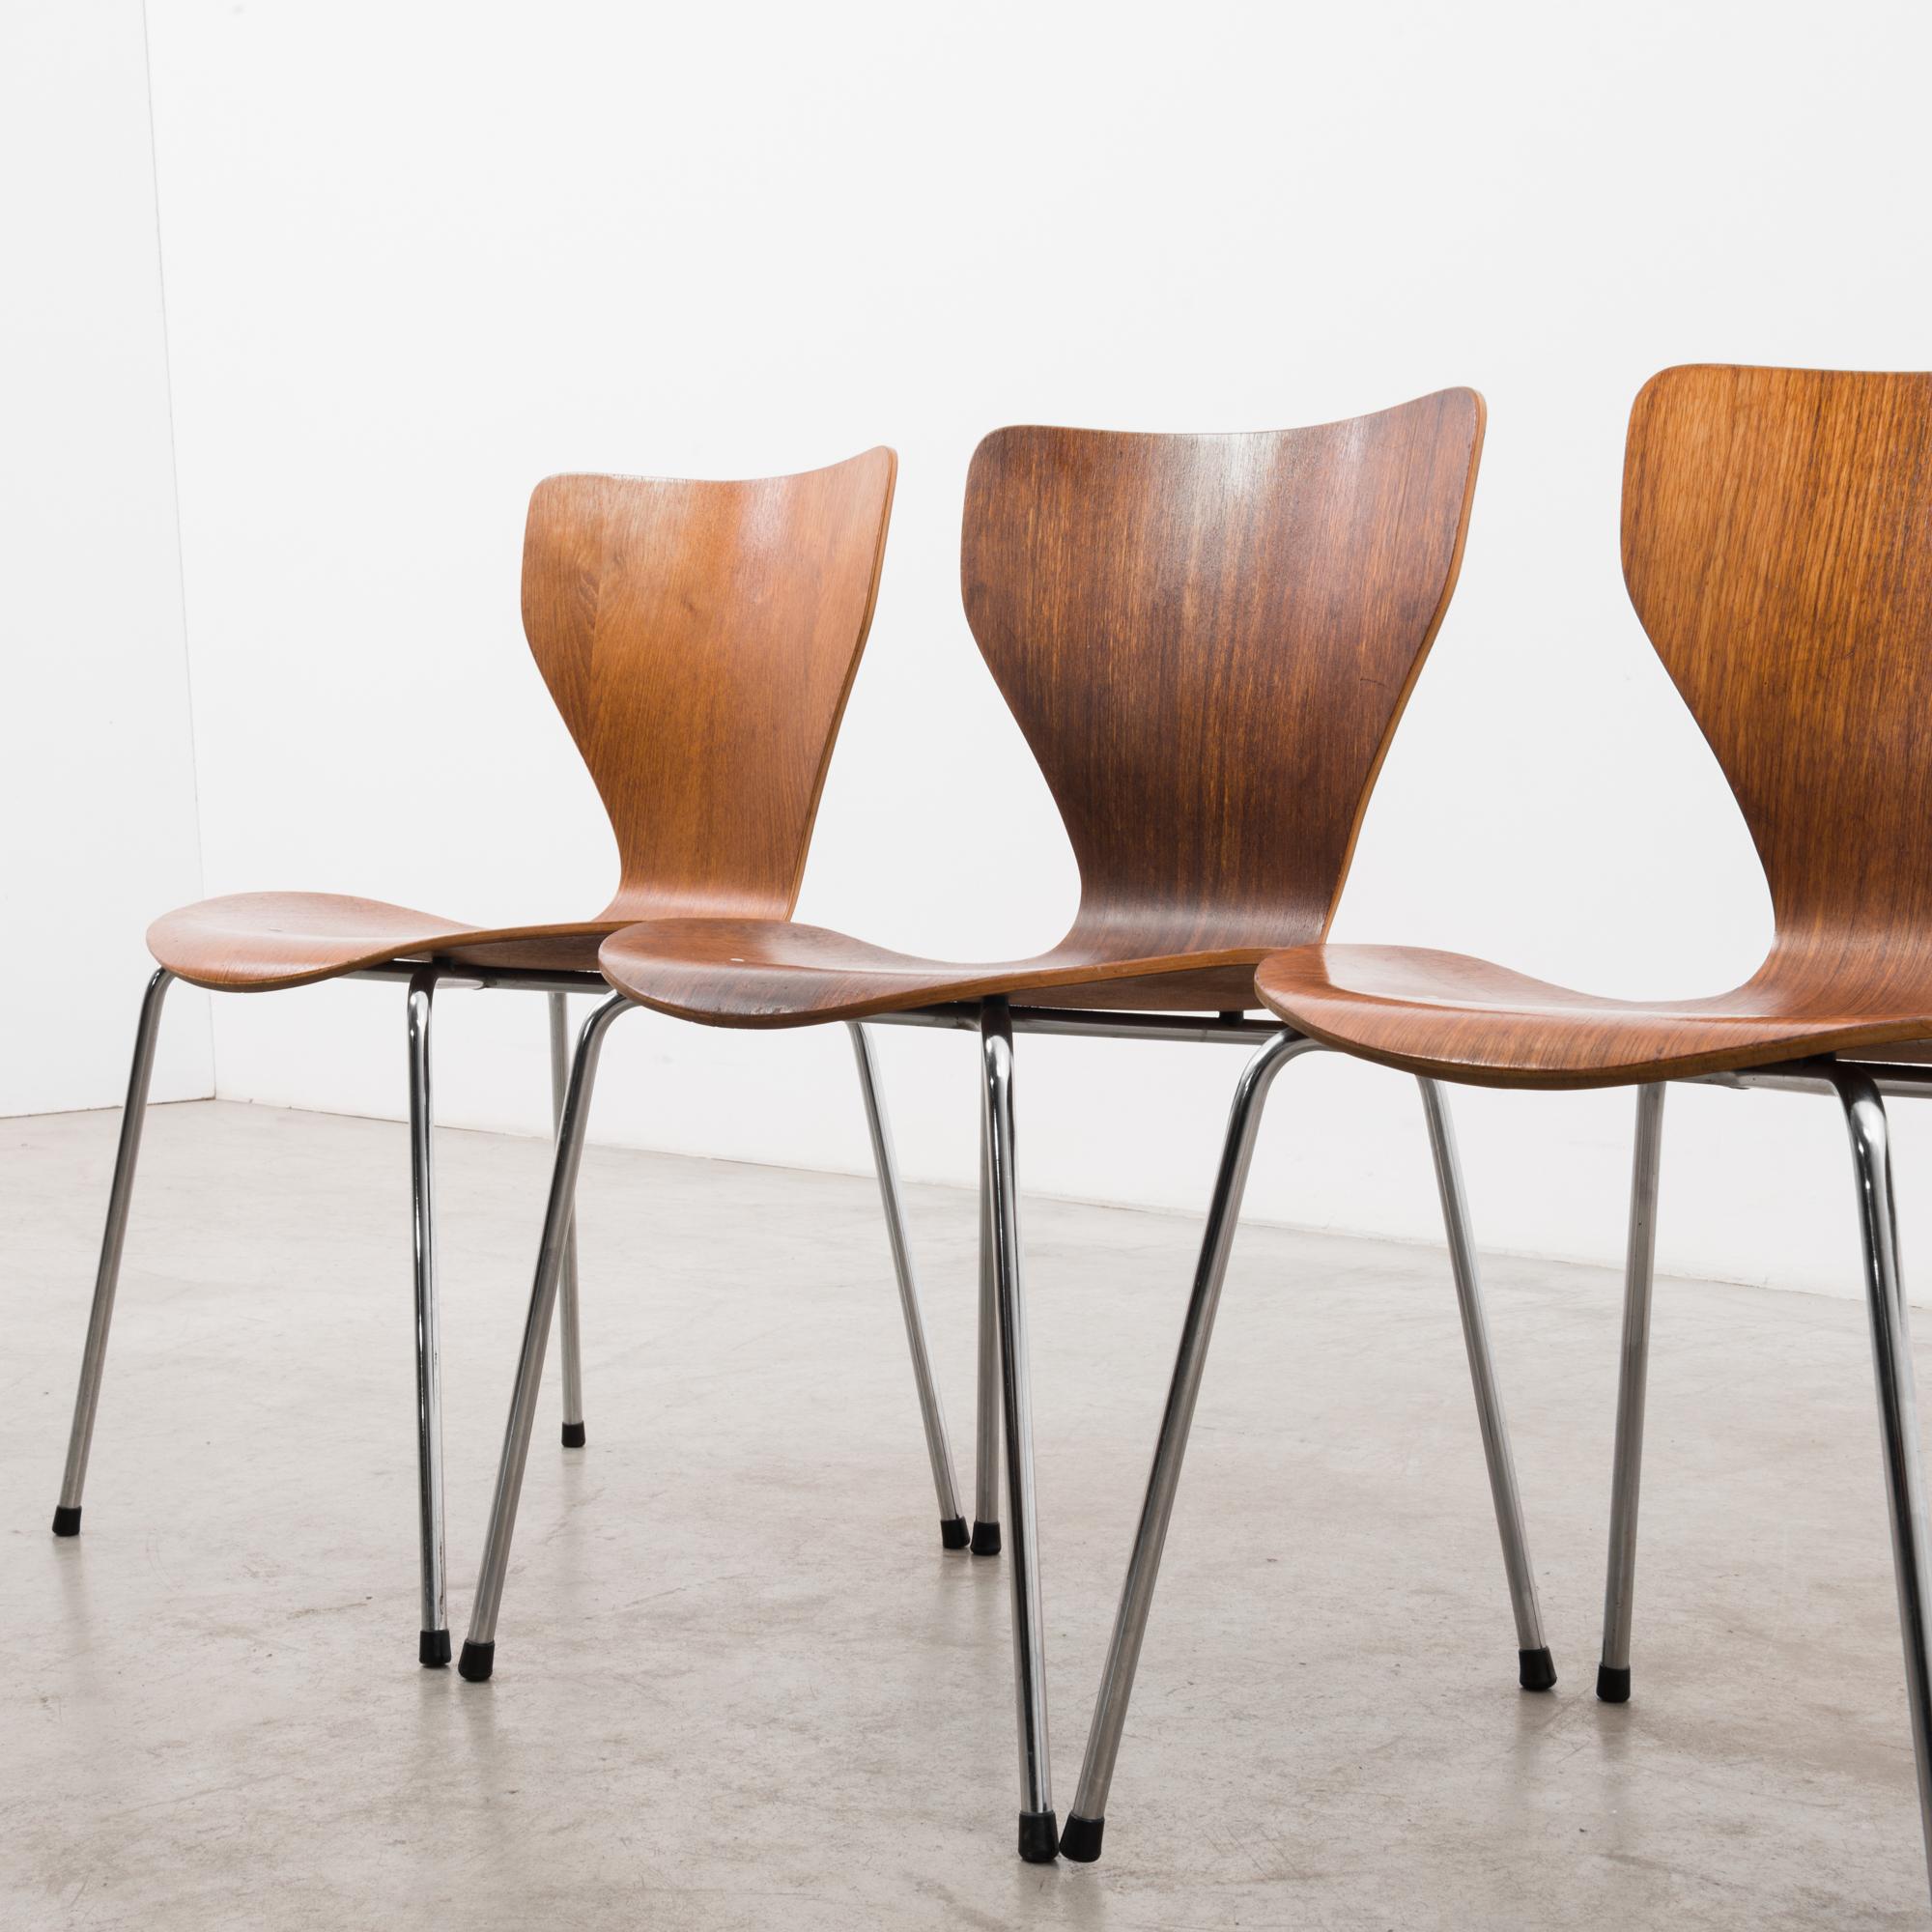 1970s Danish Modern Plywood Chairs, Set of Four 1